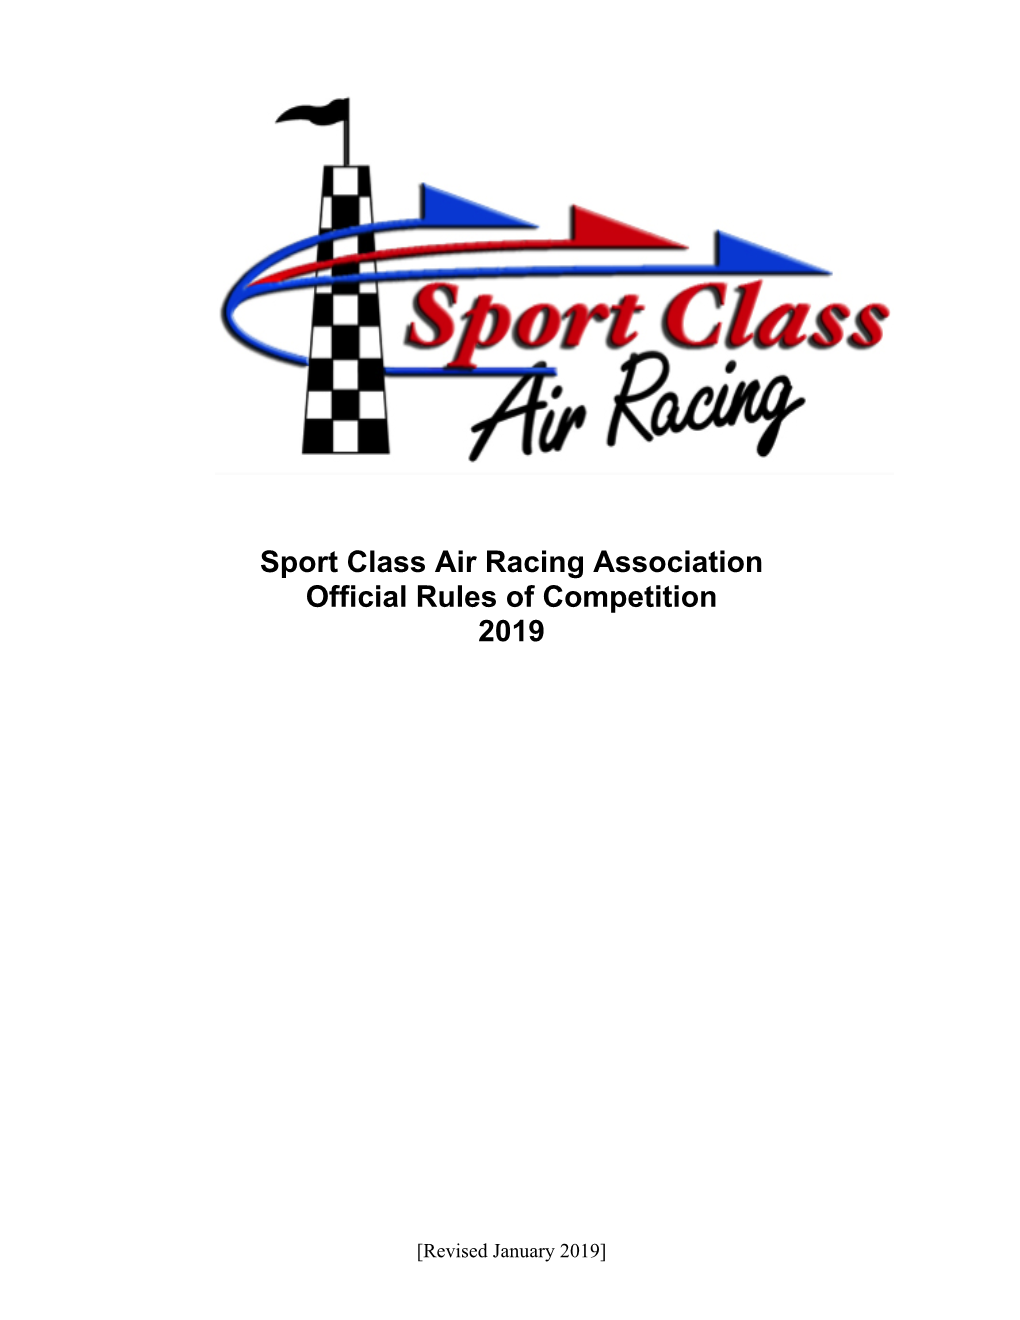 Sport Class Air Racing Association Official Rules of Competition 2019